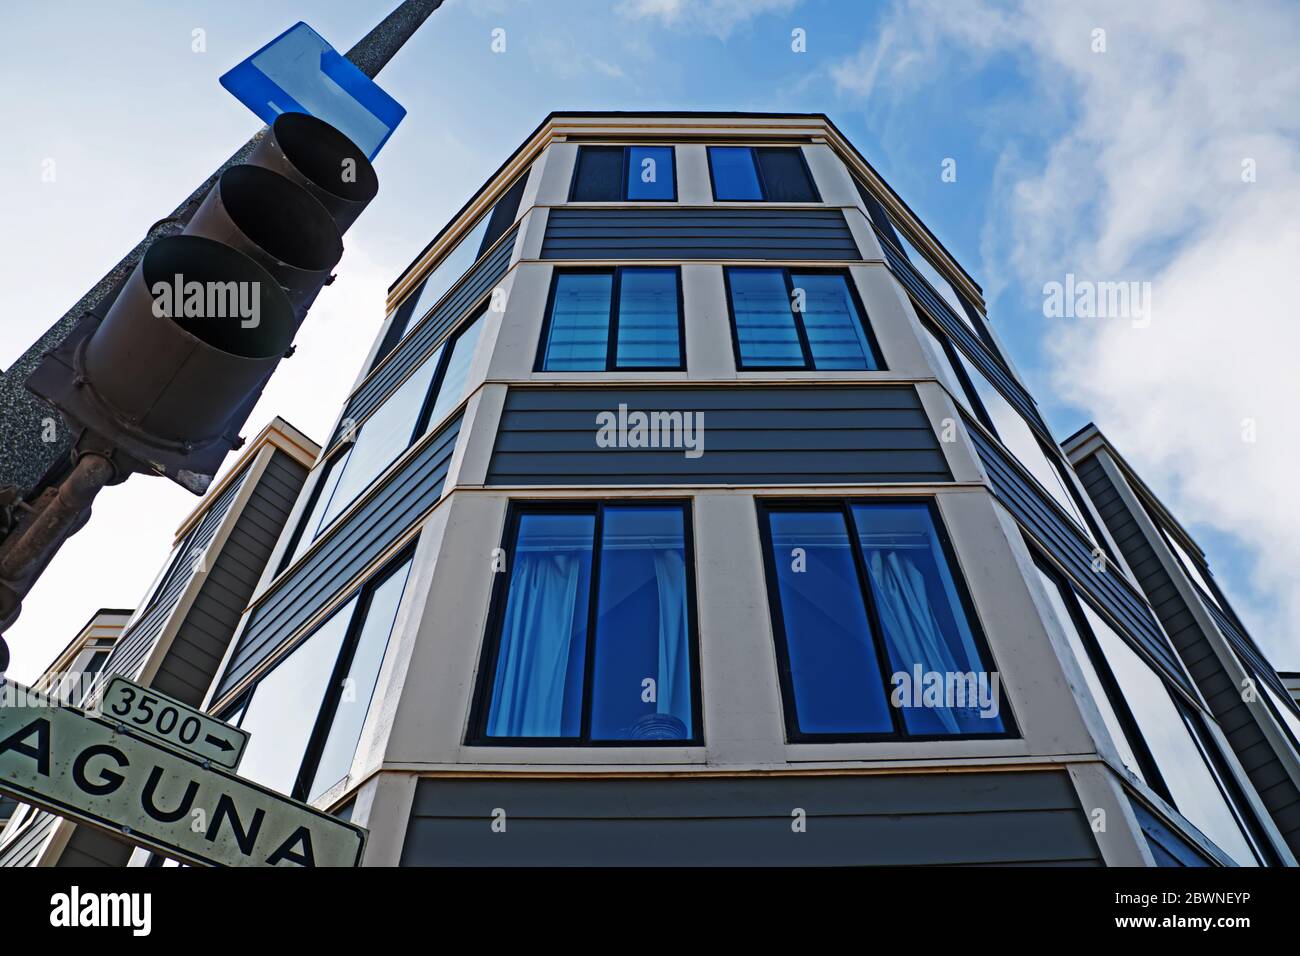 Exterior view of multifamily residential building in San Francisco Stock Photo